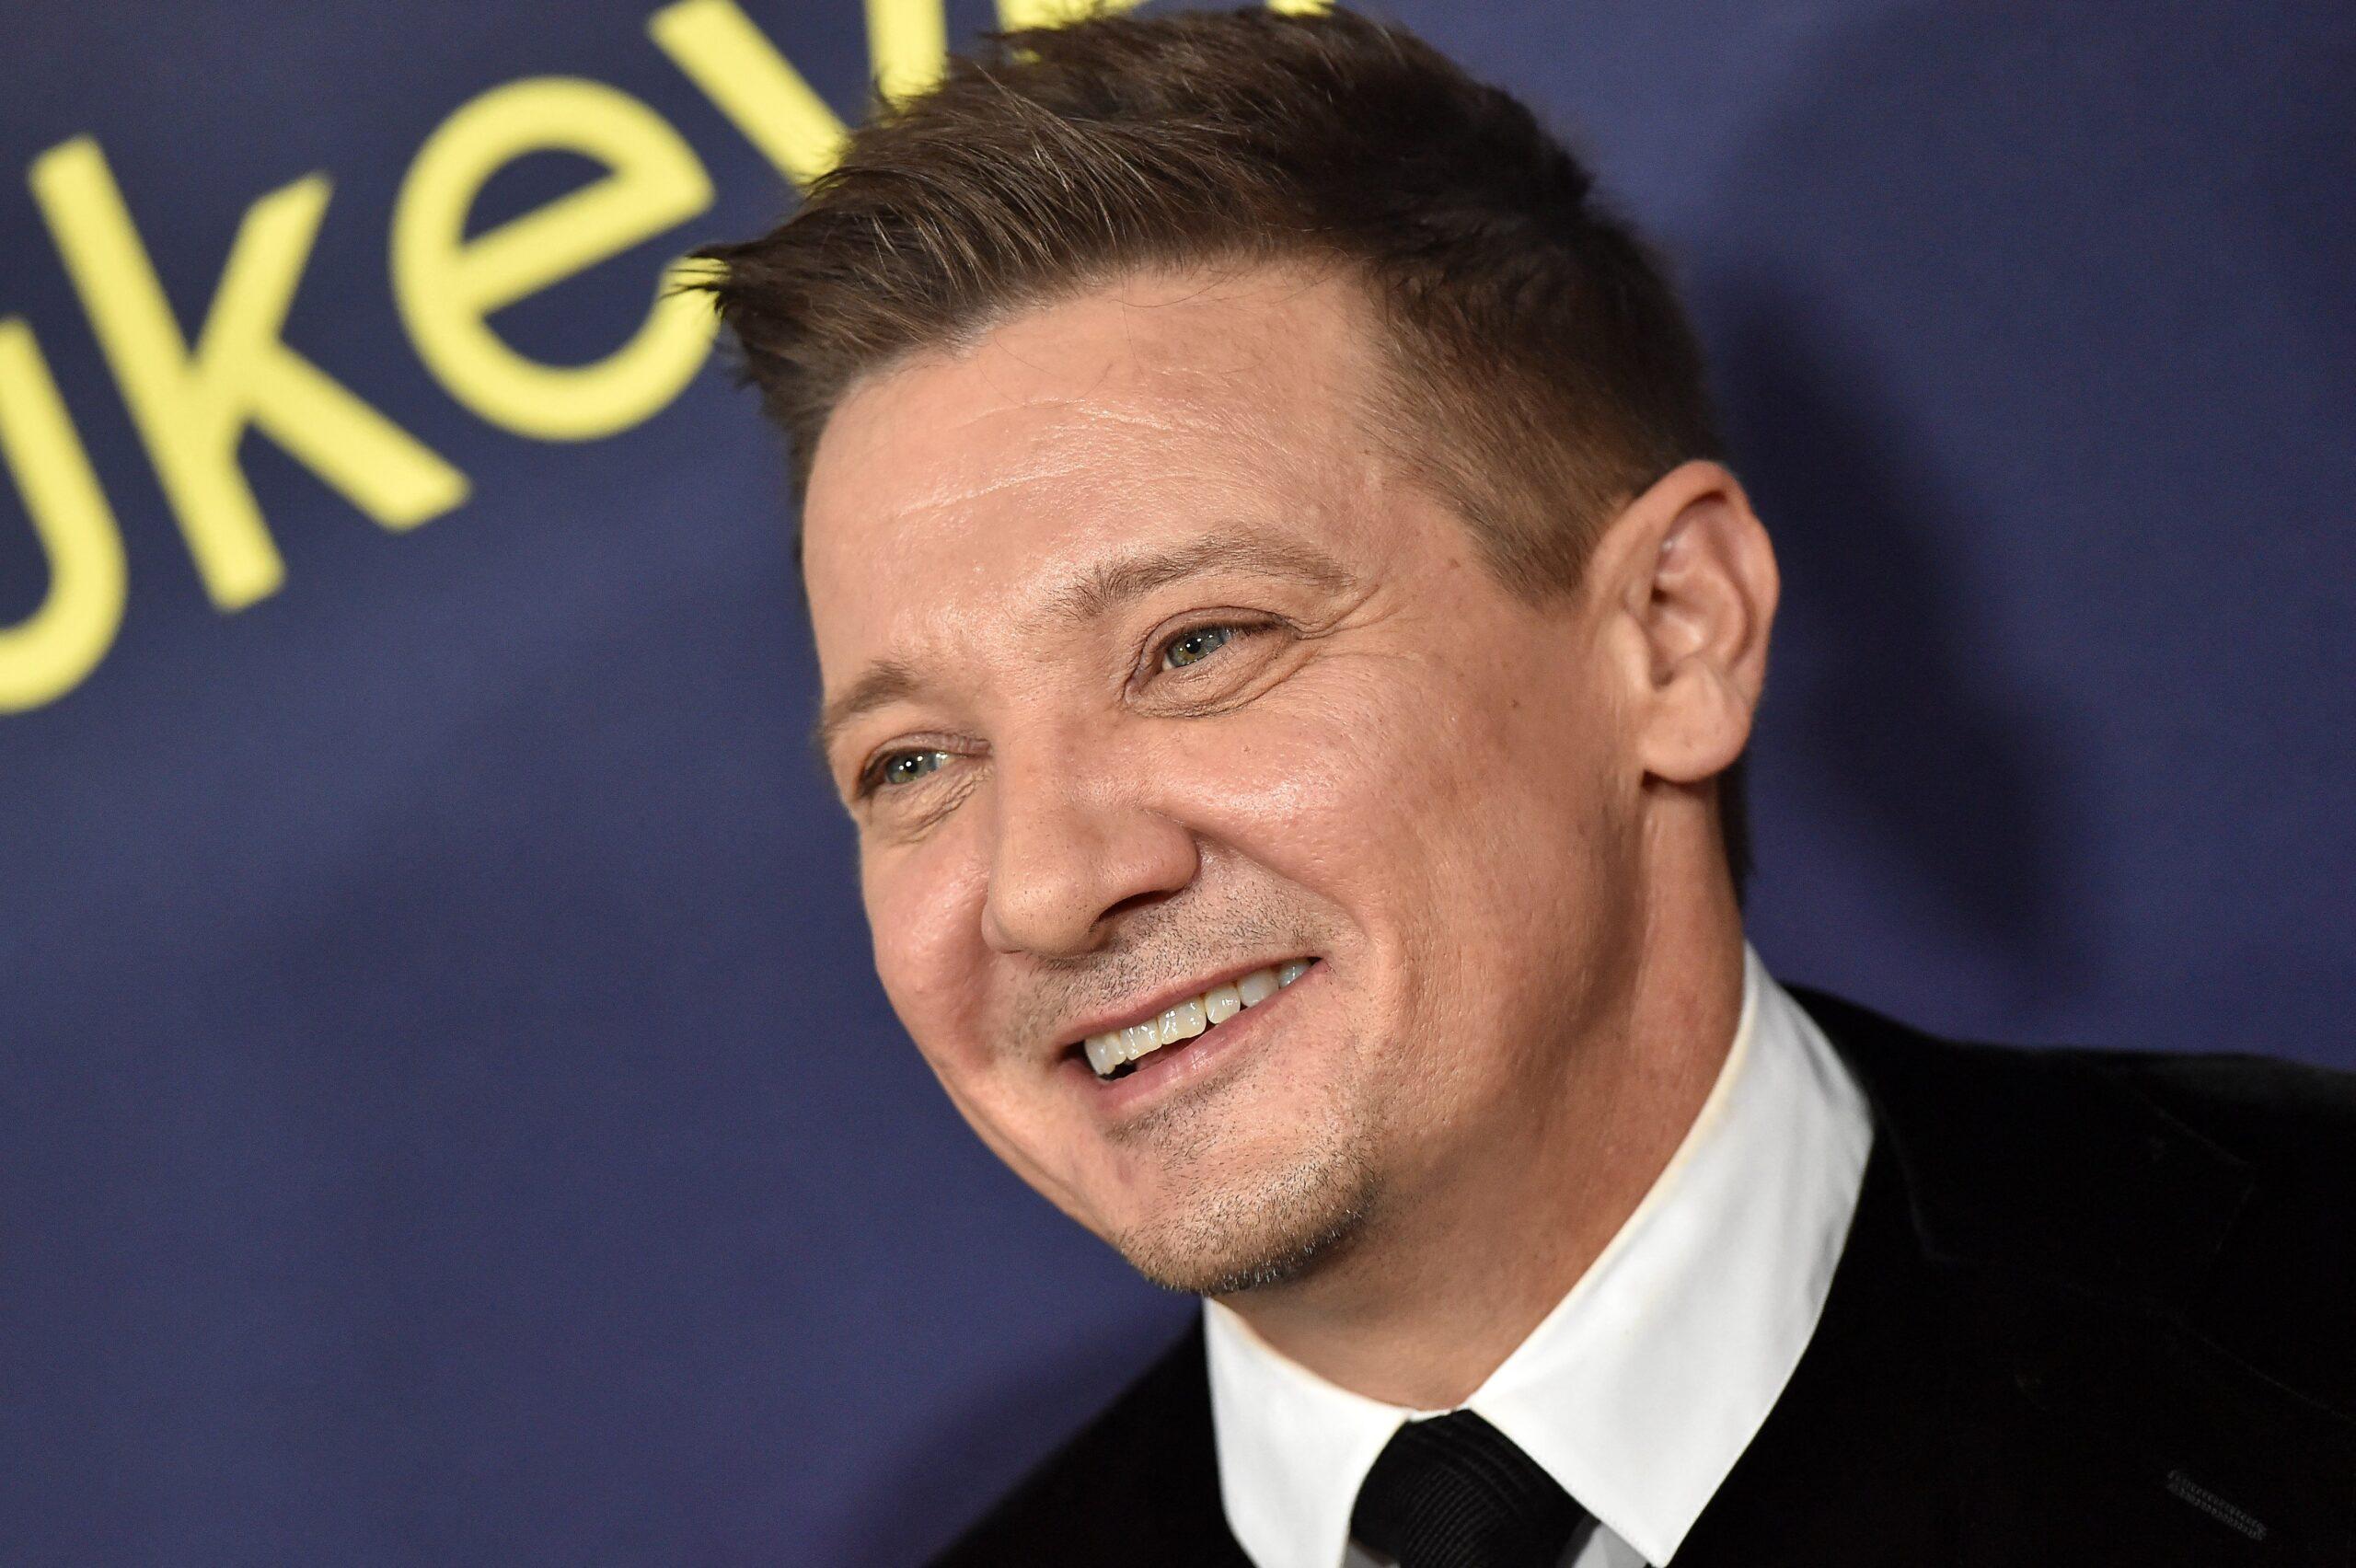 Jeremy Renner To Star In Super Bowl Ad Following Near-Fatal Accident